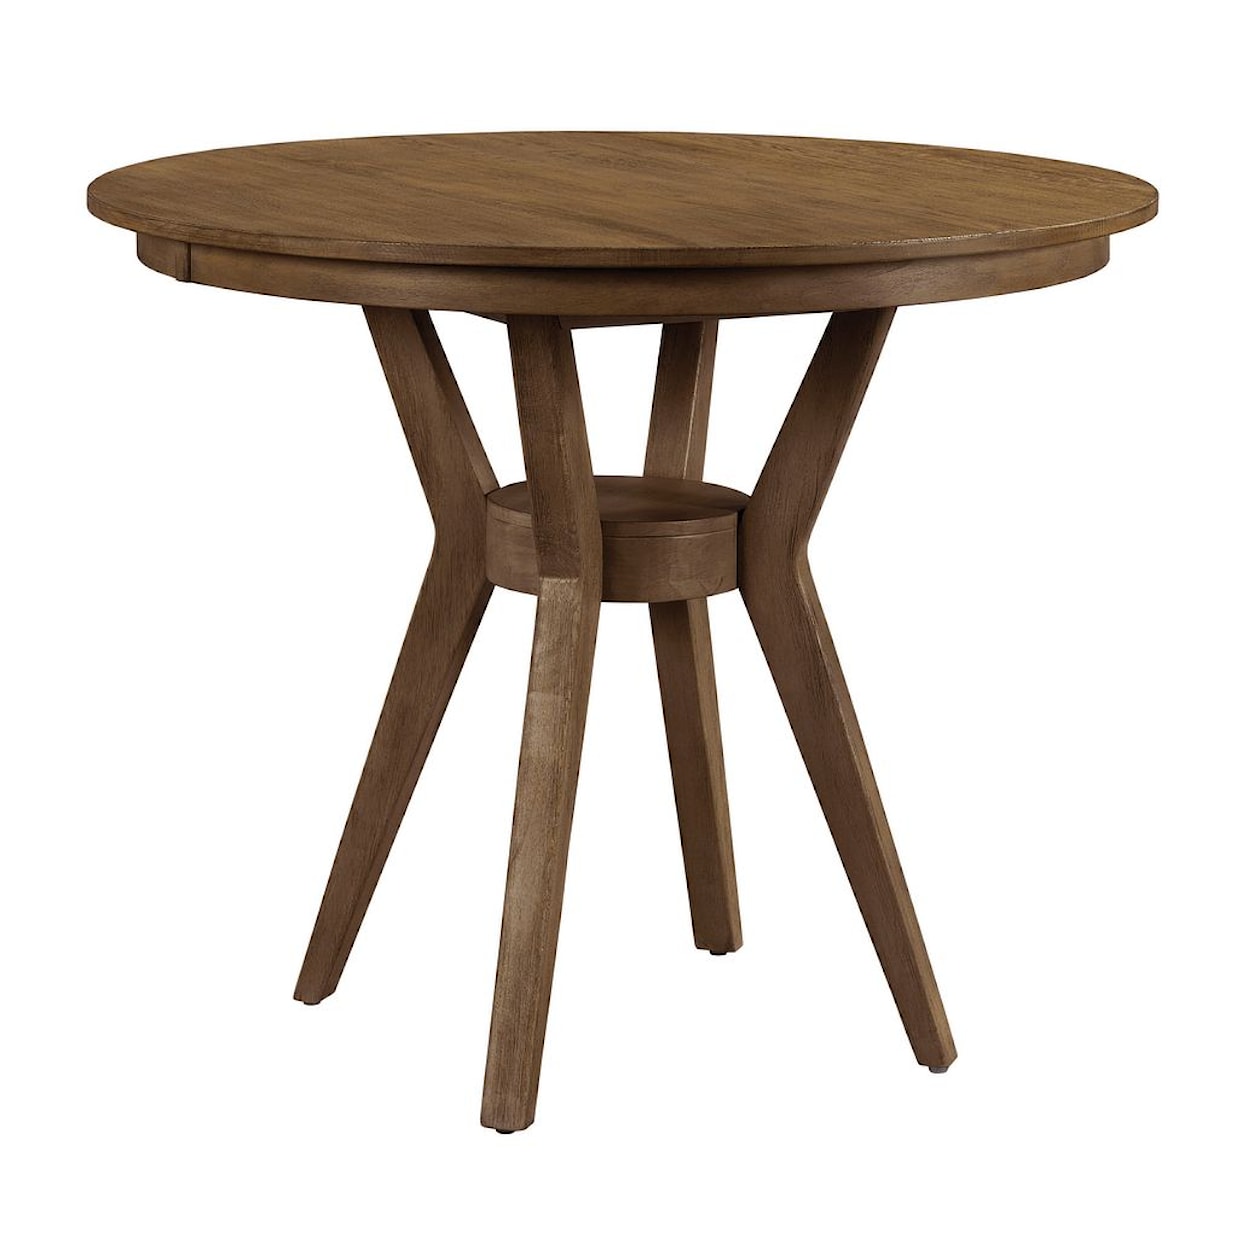 Kincaid Furniture The Nook 54" Round Counter Ht Dining Table w/ Modern